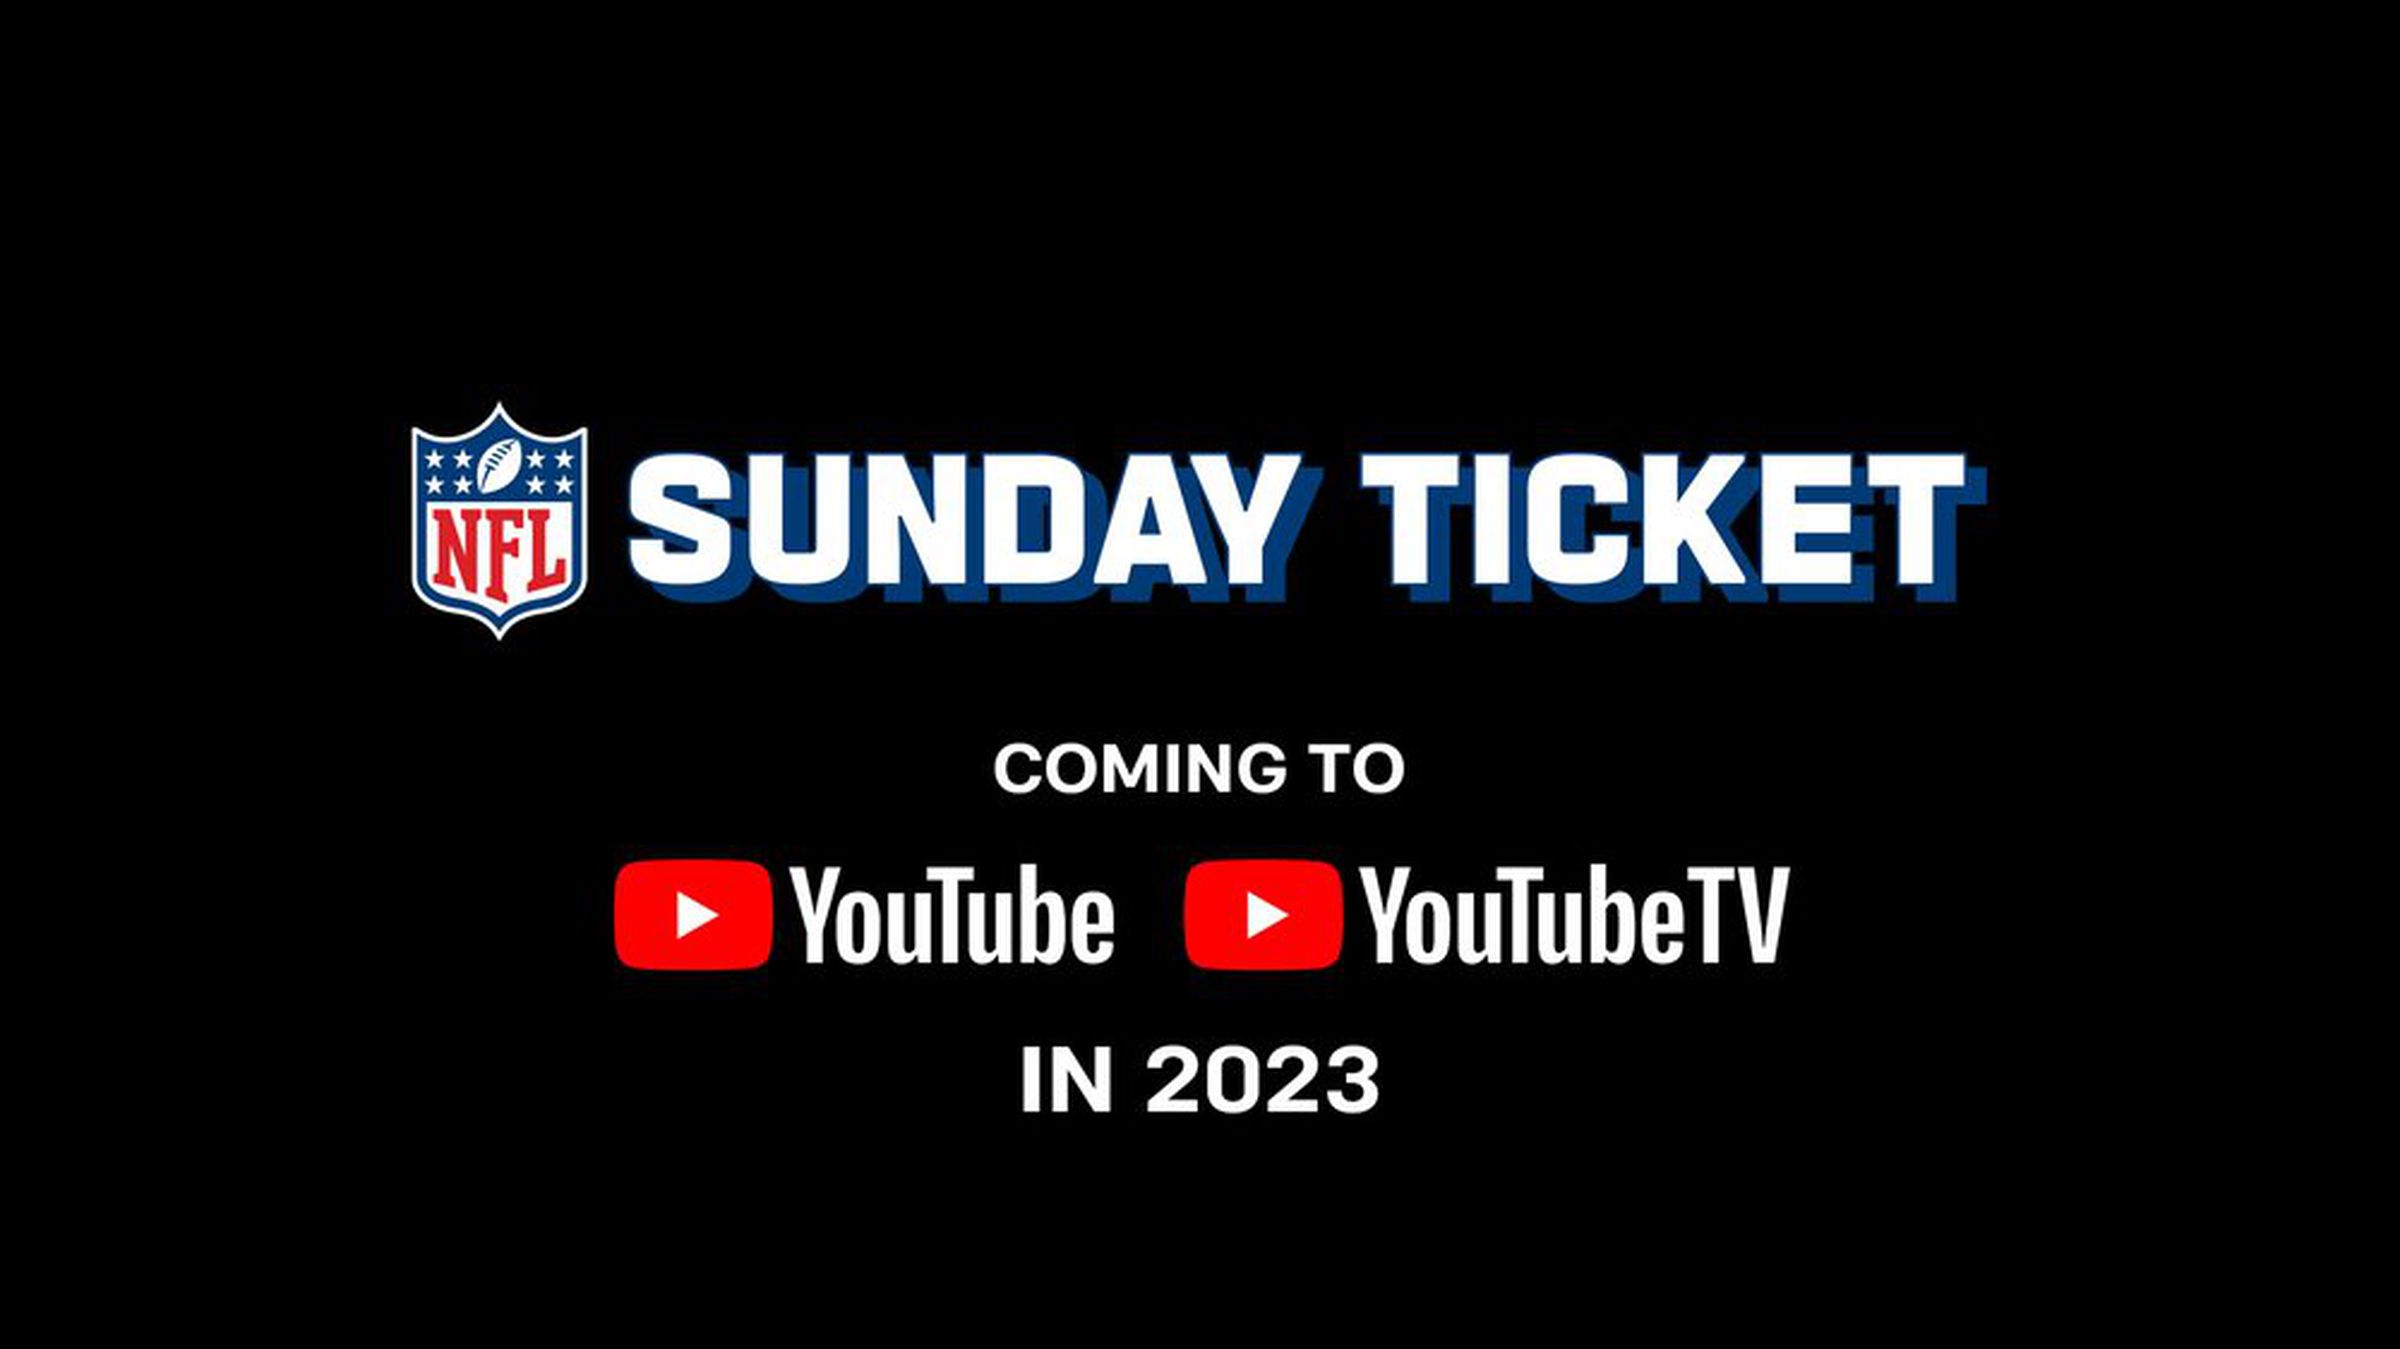 NFL Sunday Ticket coming to YouTube / YouTube TV